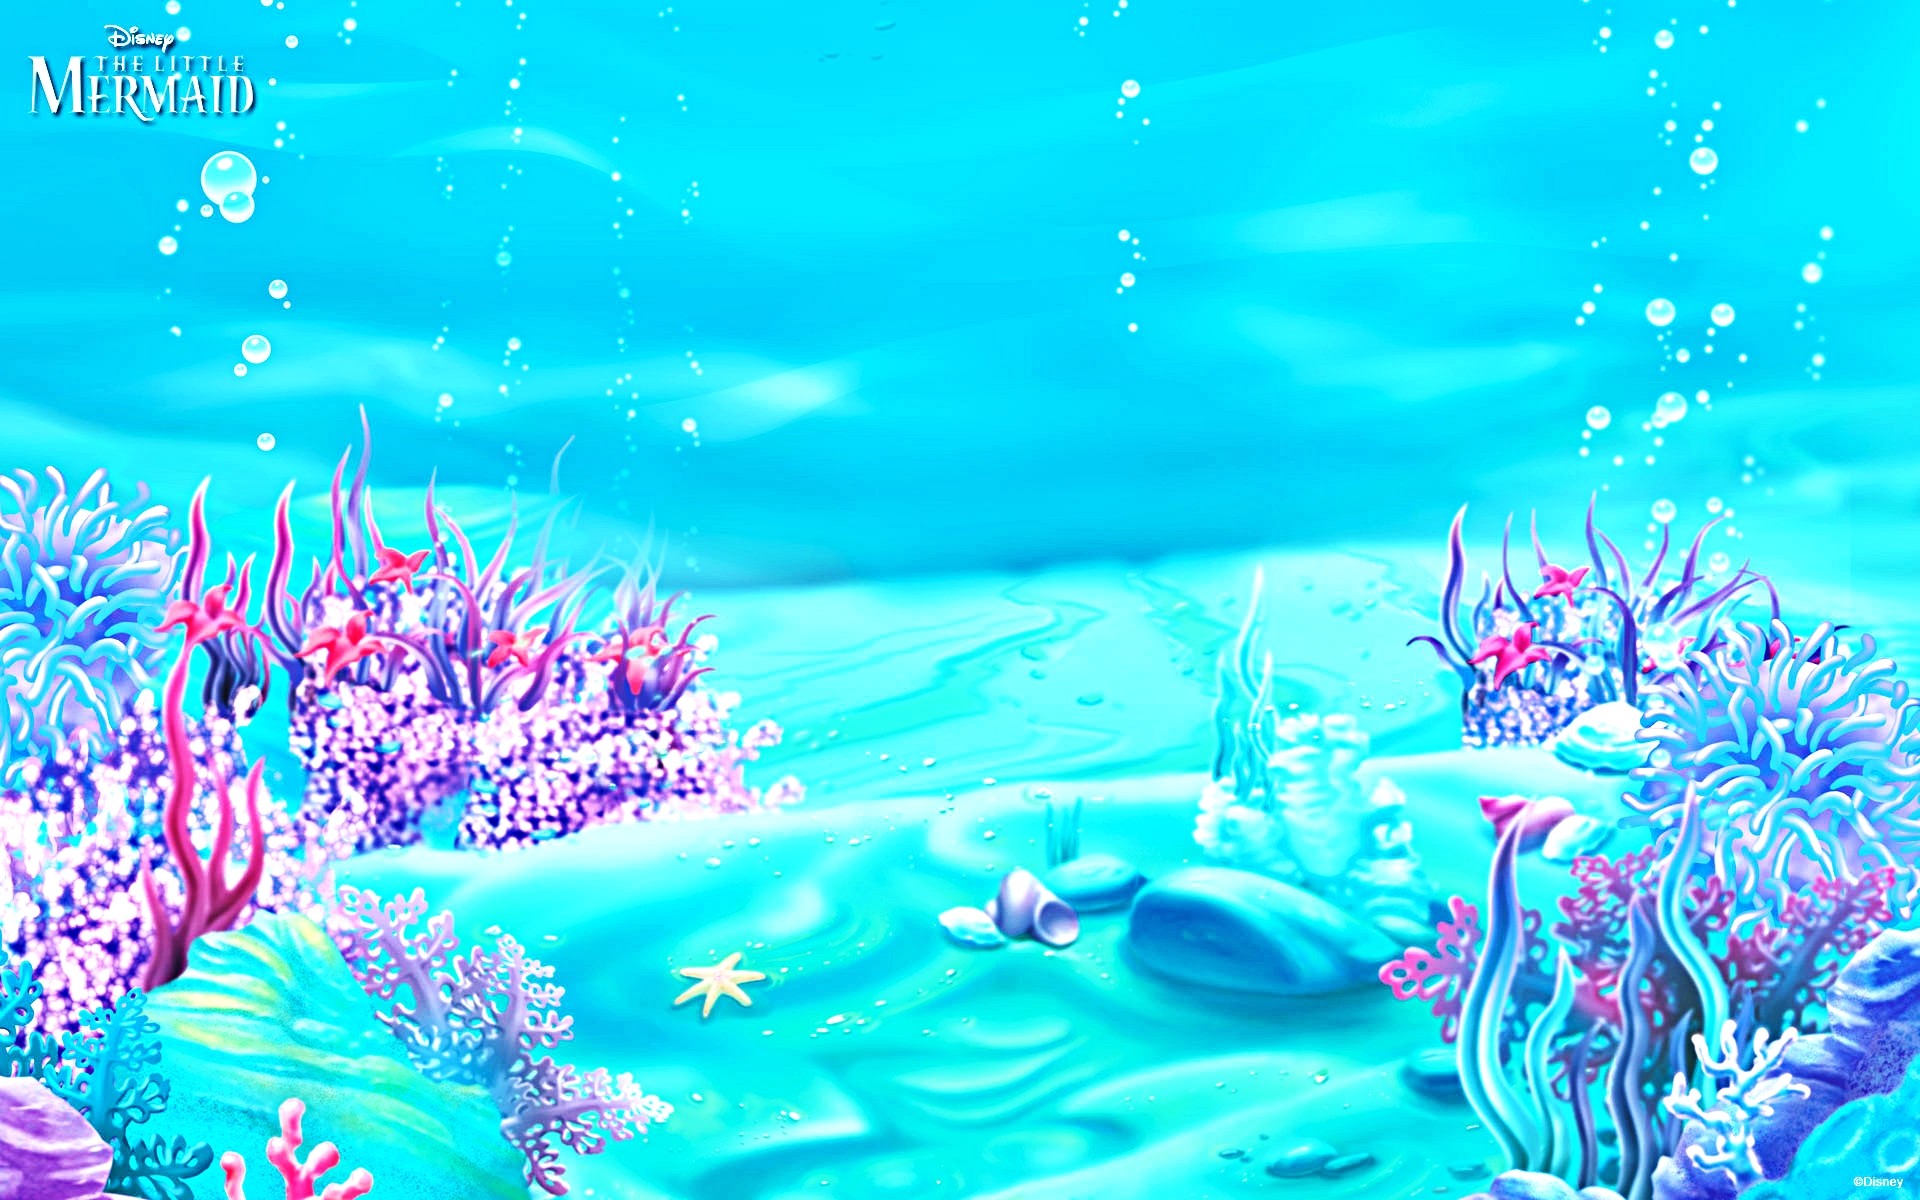 Mermaid background ·① Download free stunning full HD wallpapers for